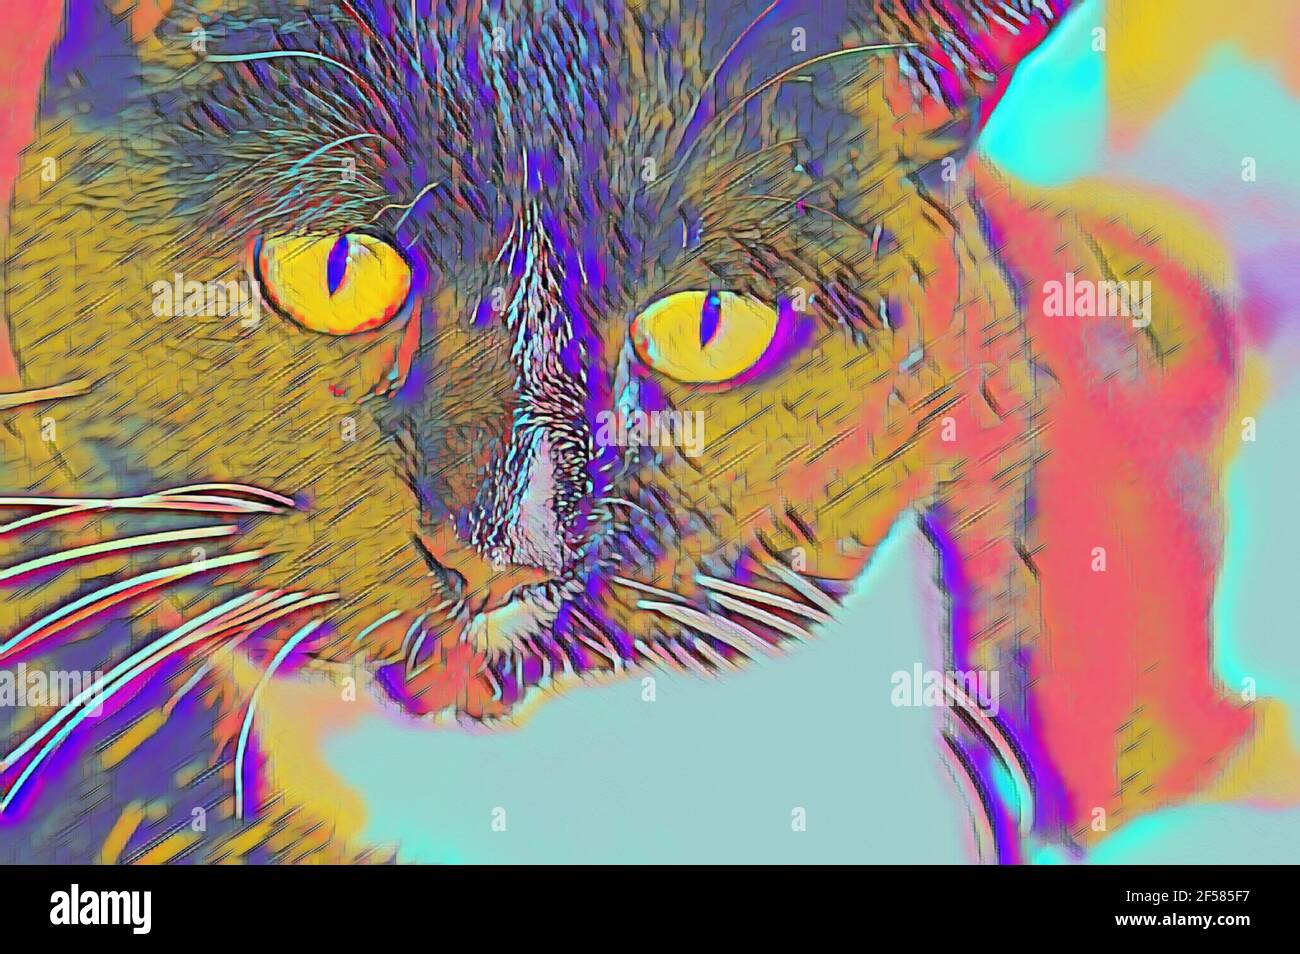 cat in psychedelic colors Stock Photo